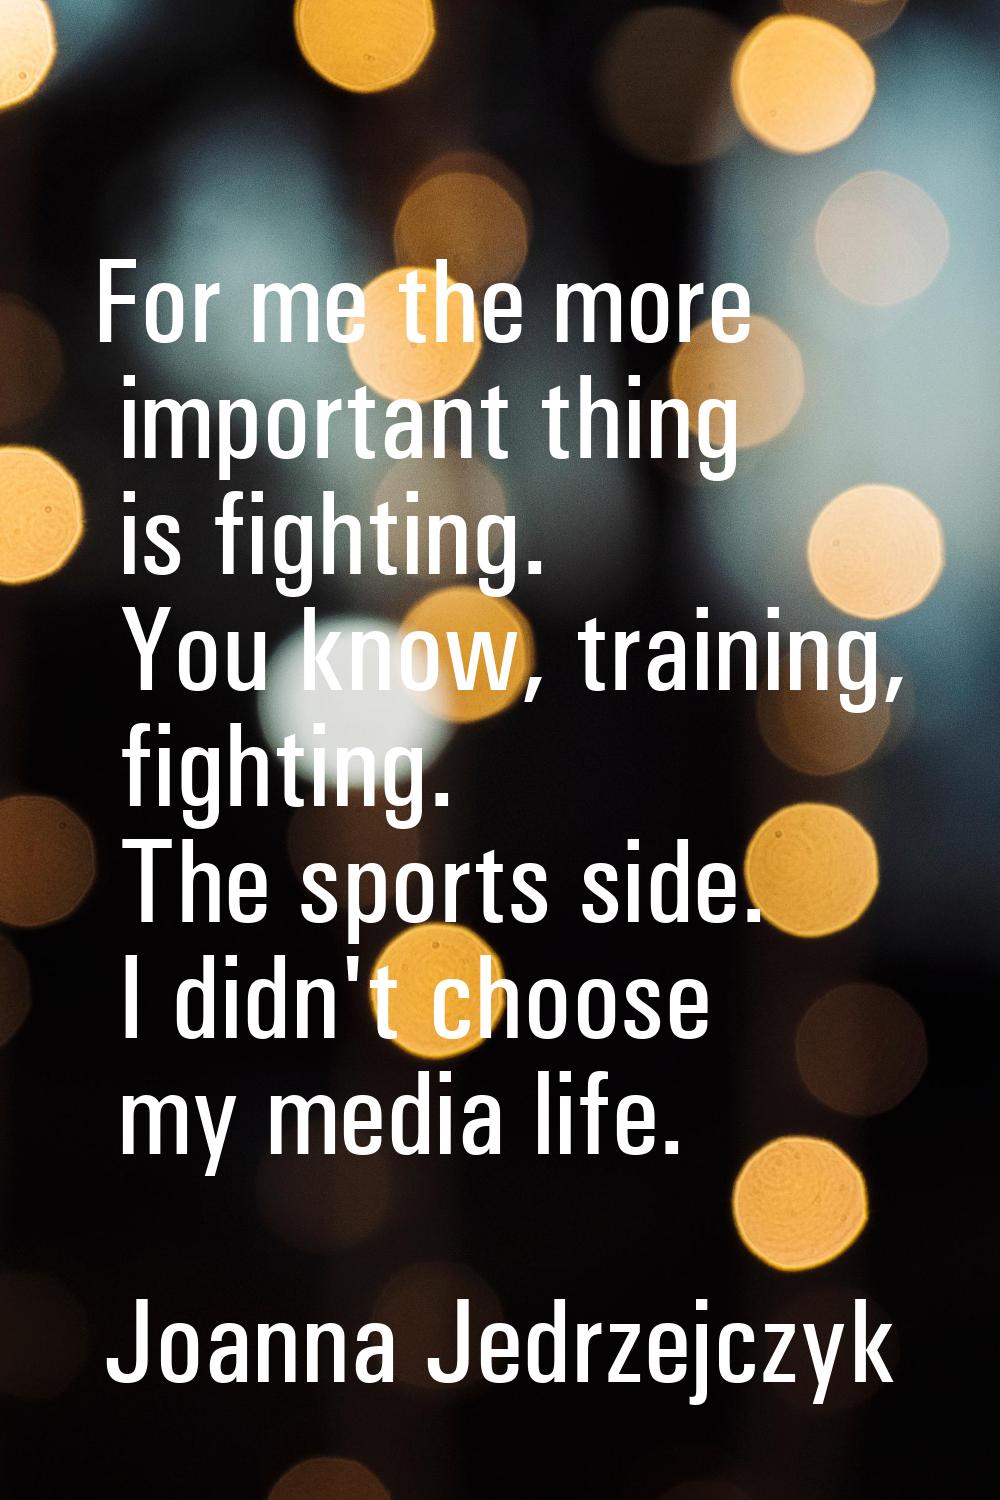 For me the more important thing is fighting. You know, training, fighting. The sports side. I didn'